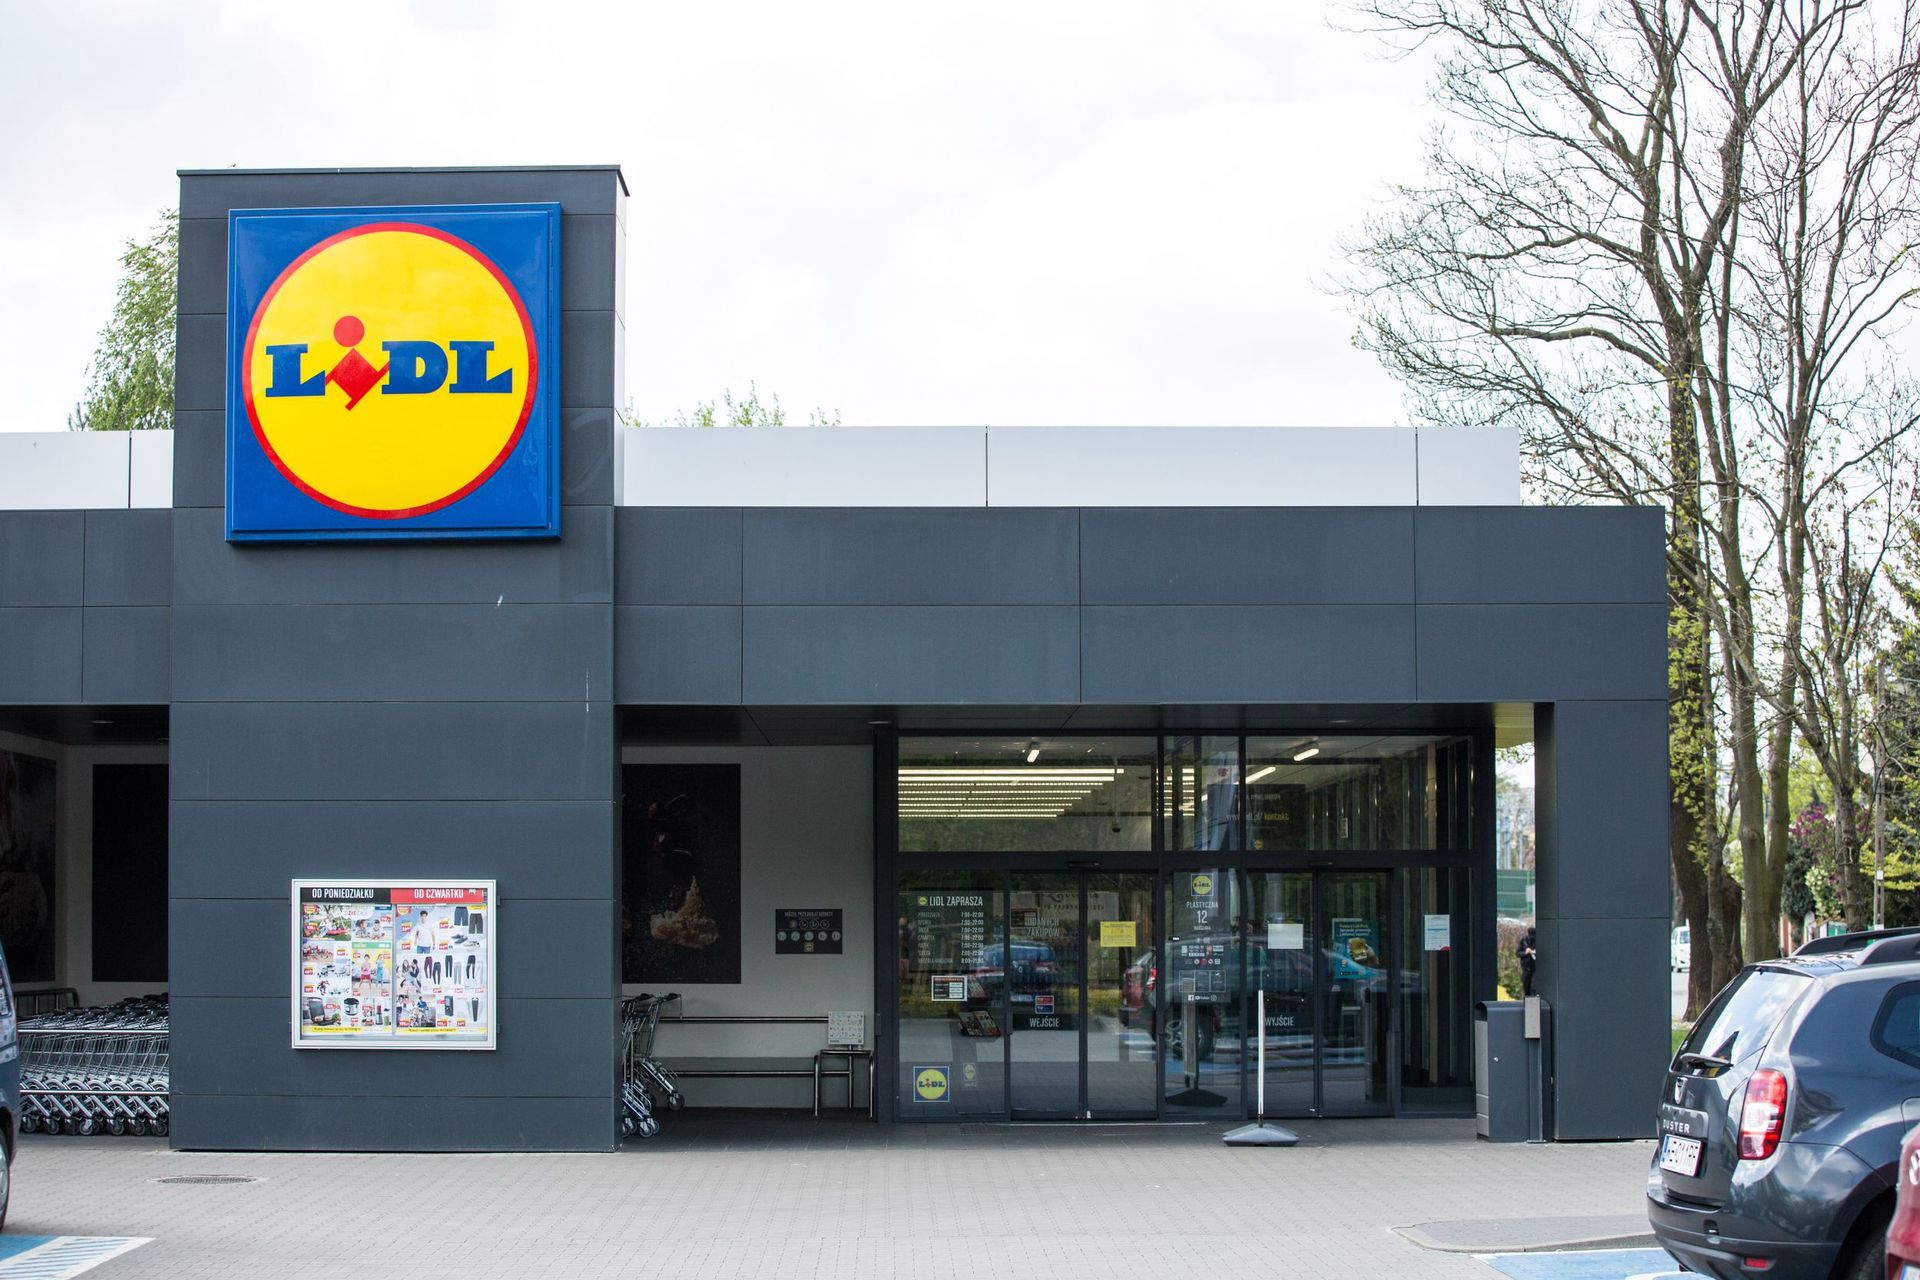 Crowds will flock to Lidl on Monday.  This will be a great opportunity